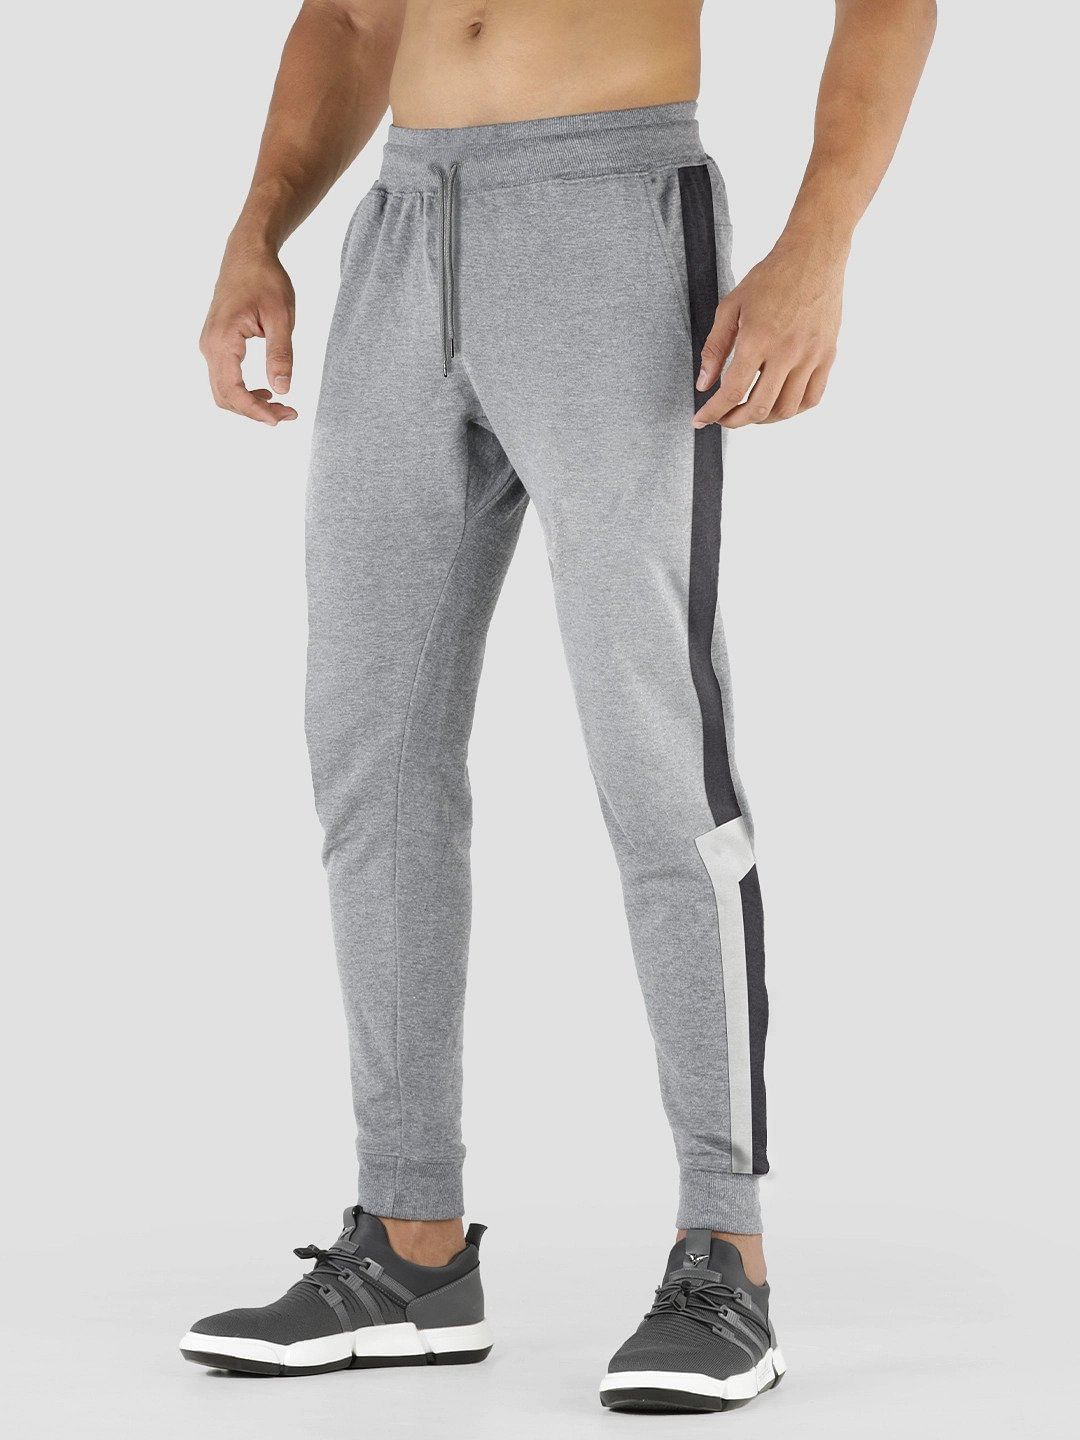 Buy Solids Grey Scale Joggers Online